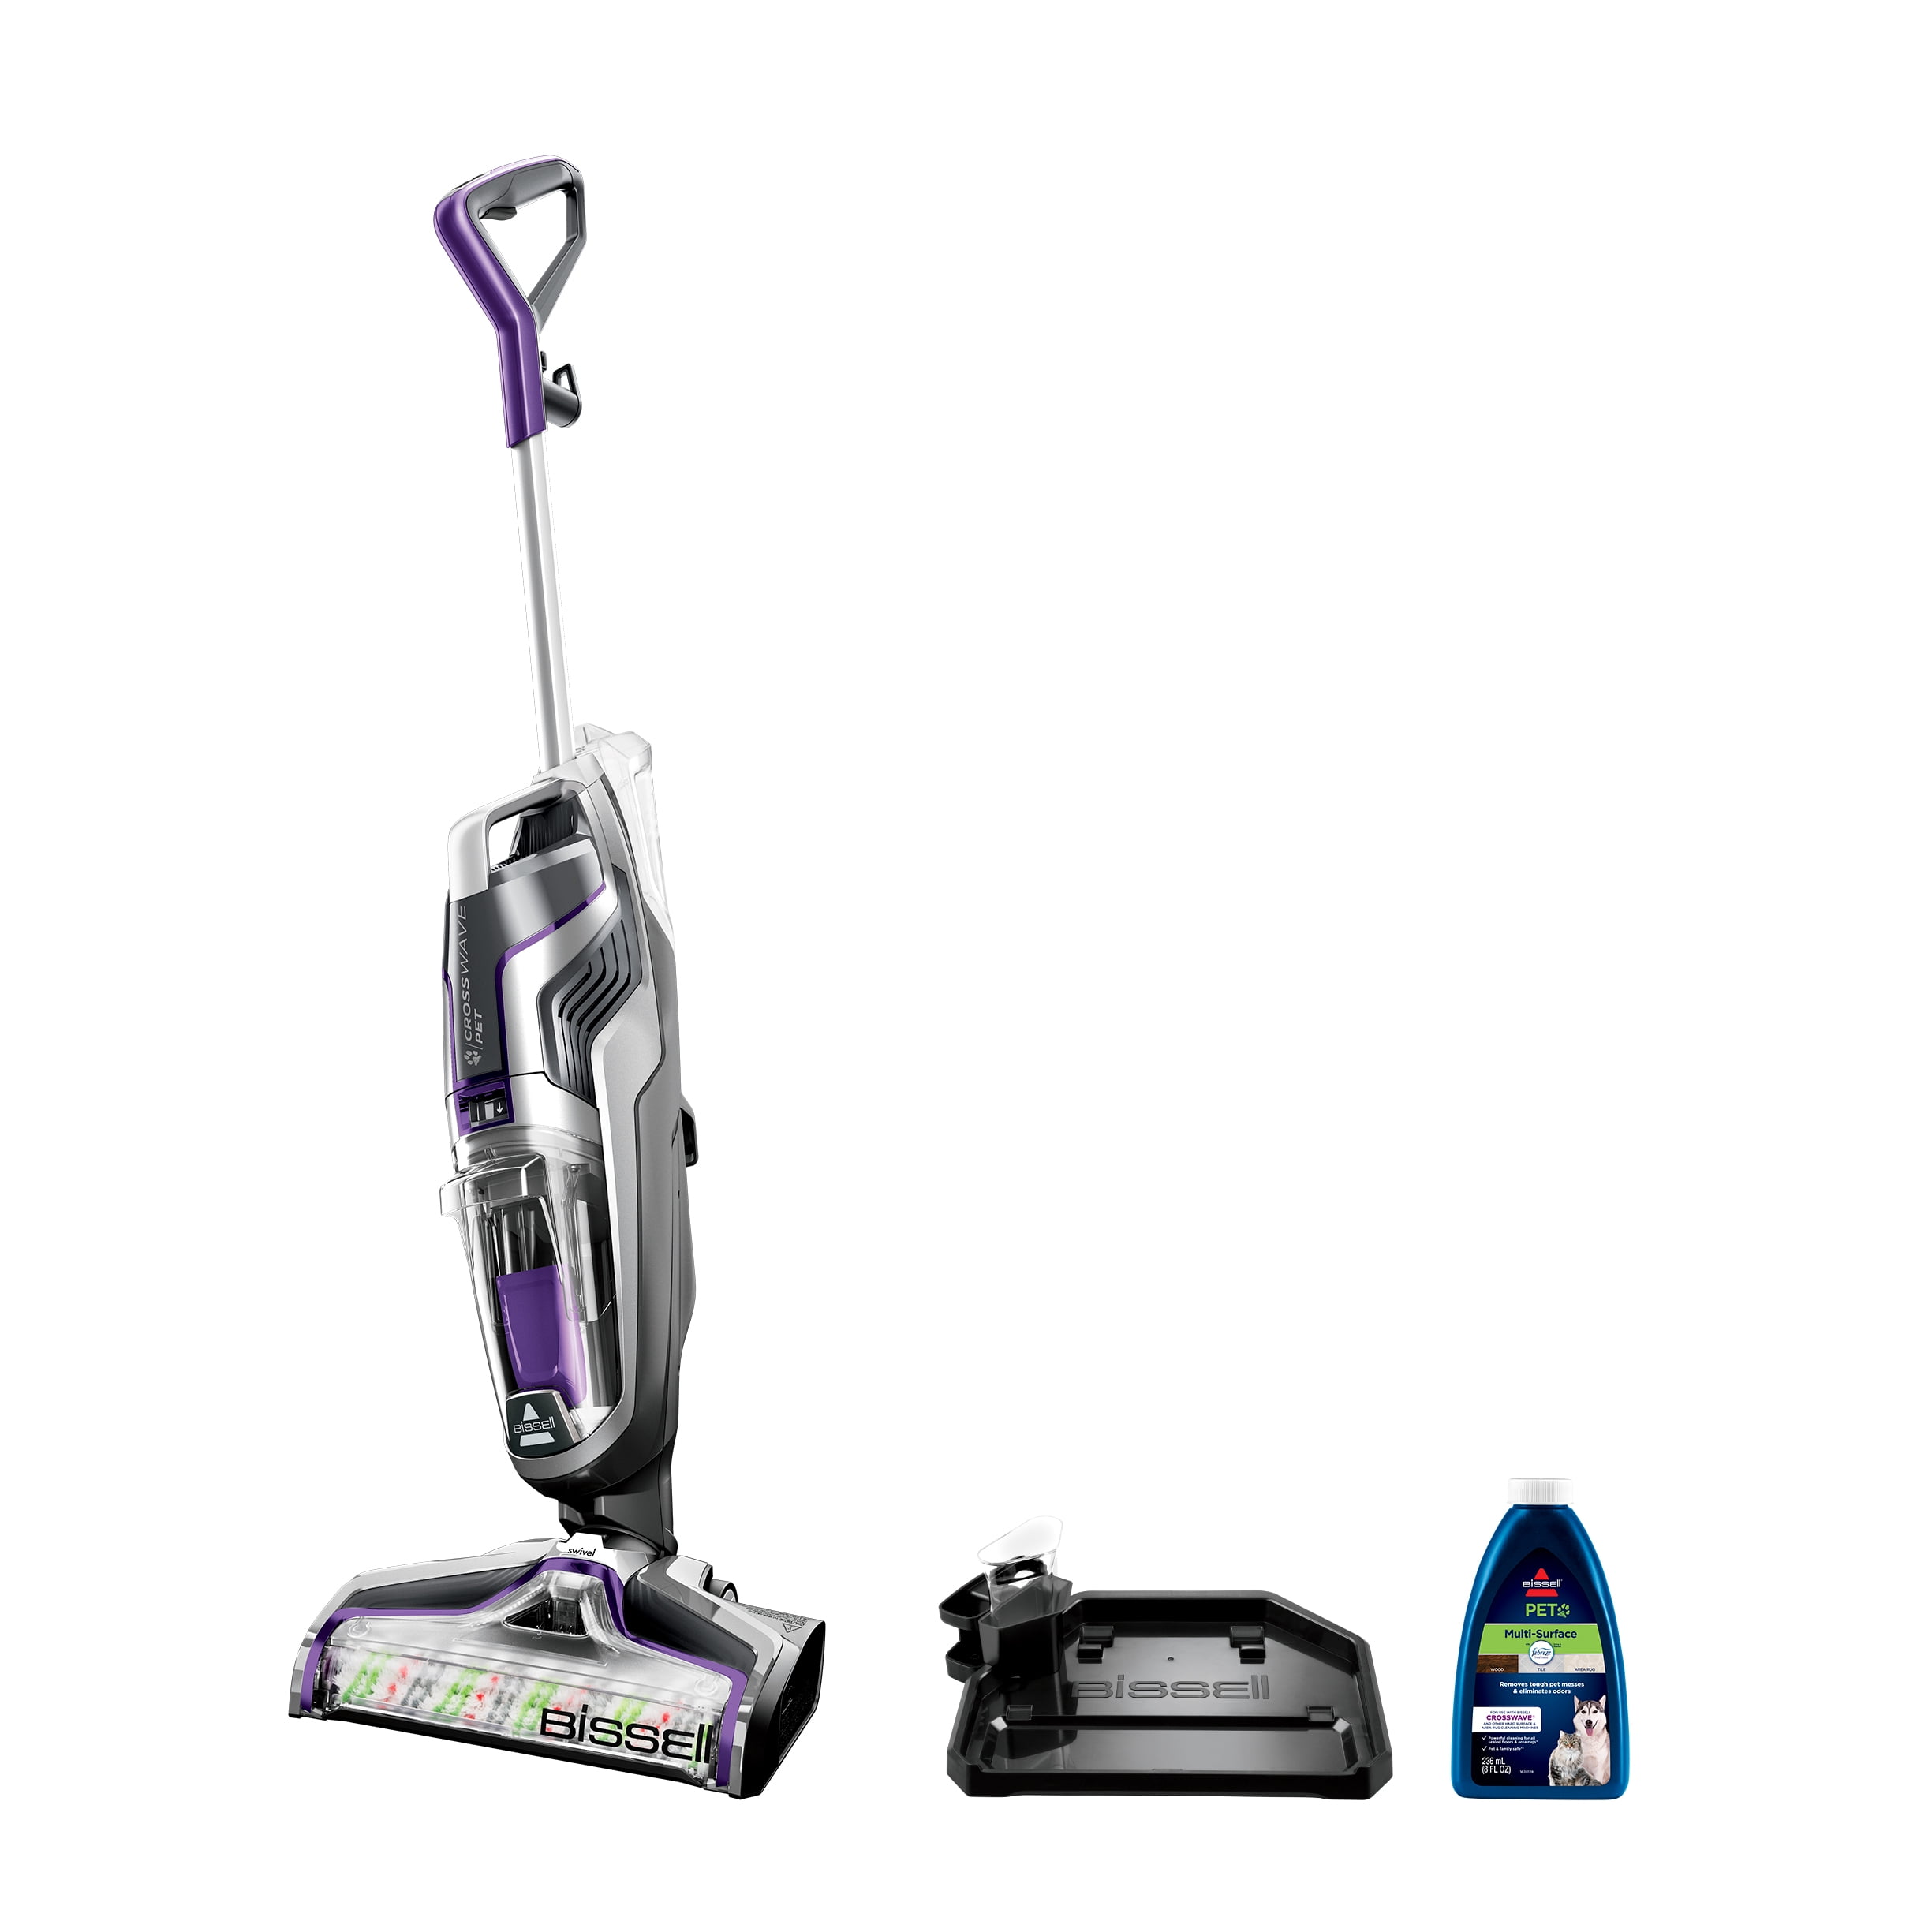 BISSELL Crosswave Pet Multi-Surface Wet/Dry Vacuum $188 + Free Shipping